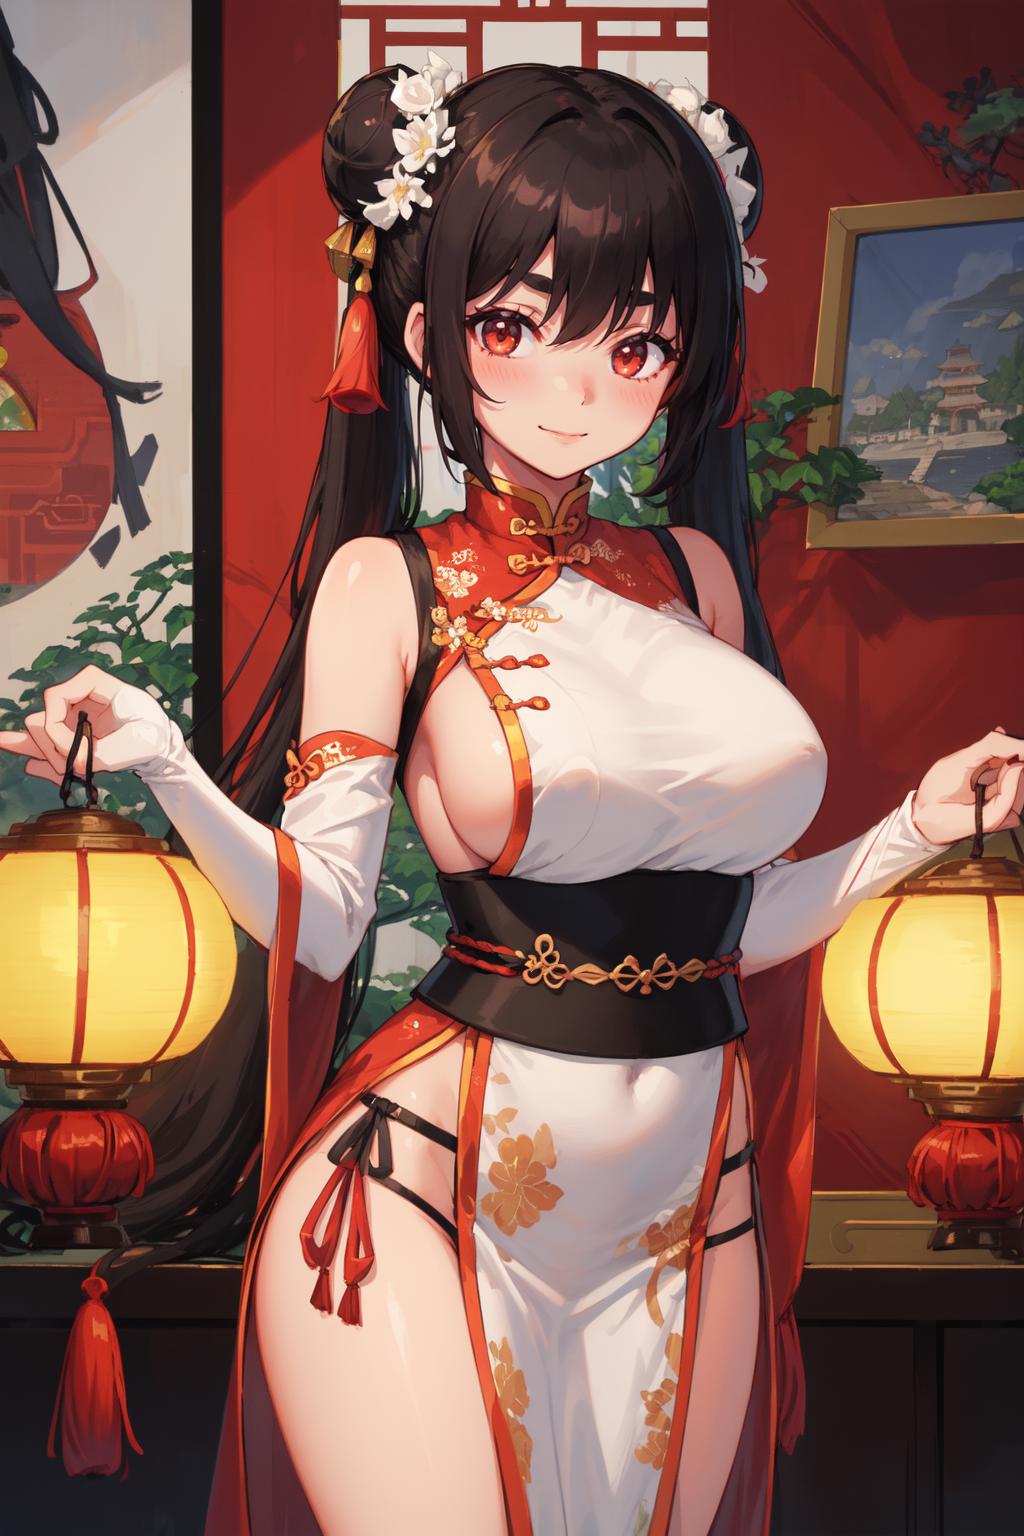 Anime character wearing a red dress with a lantern.